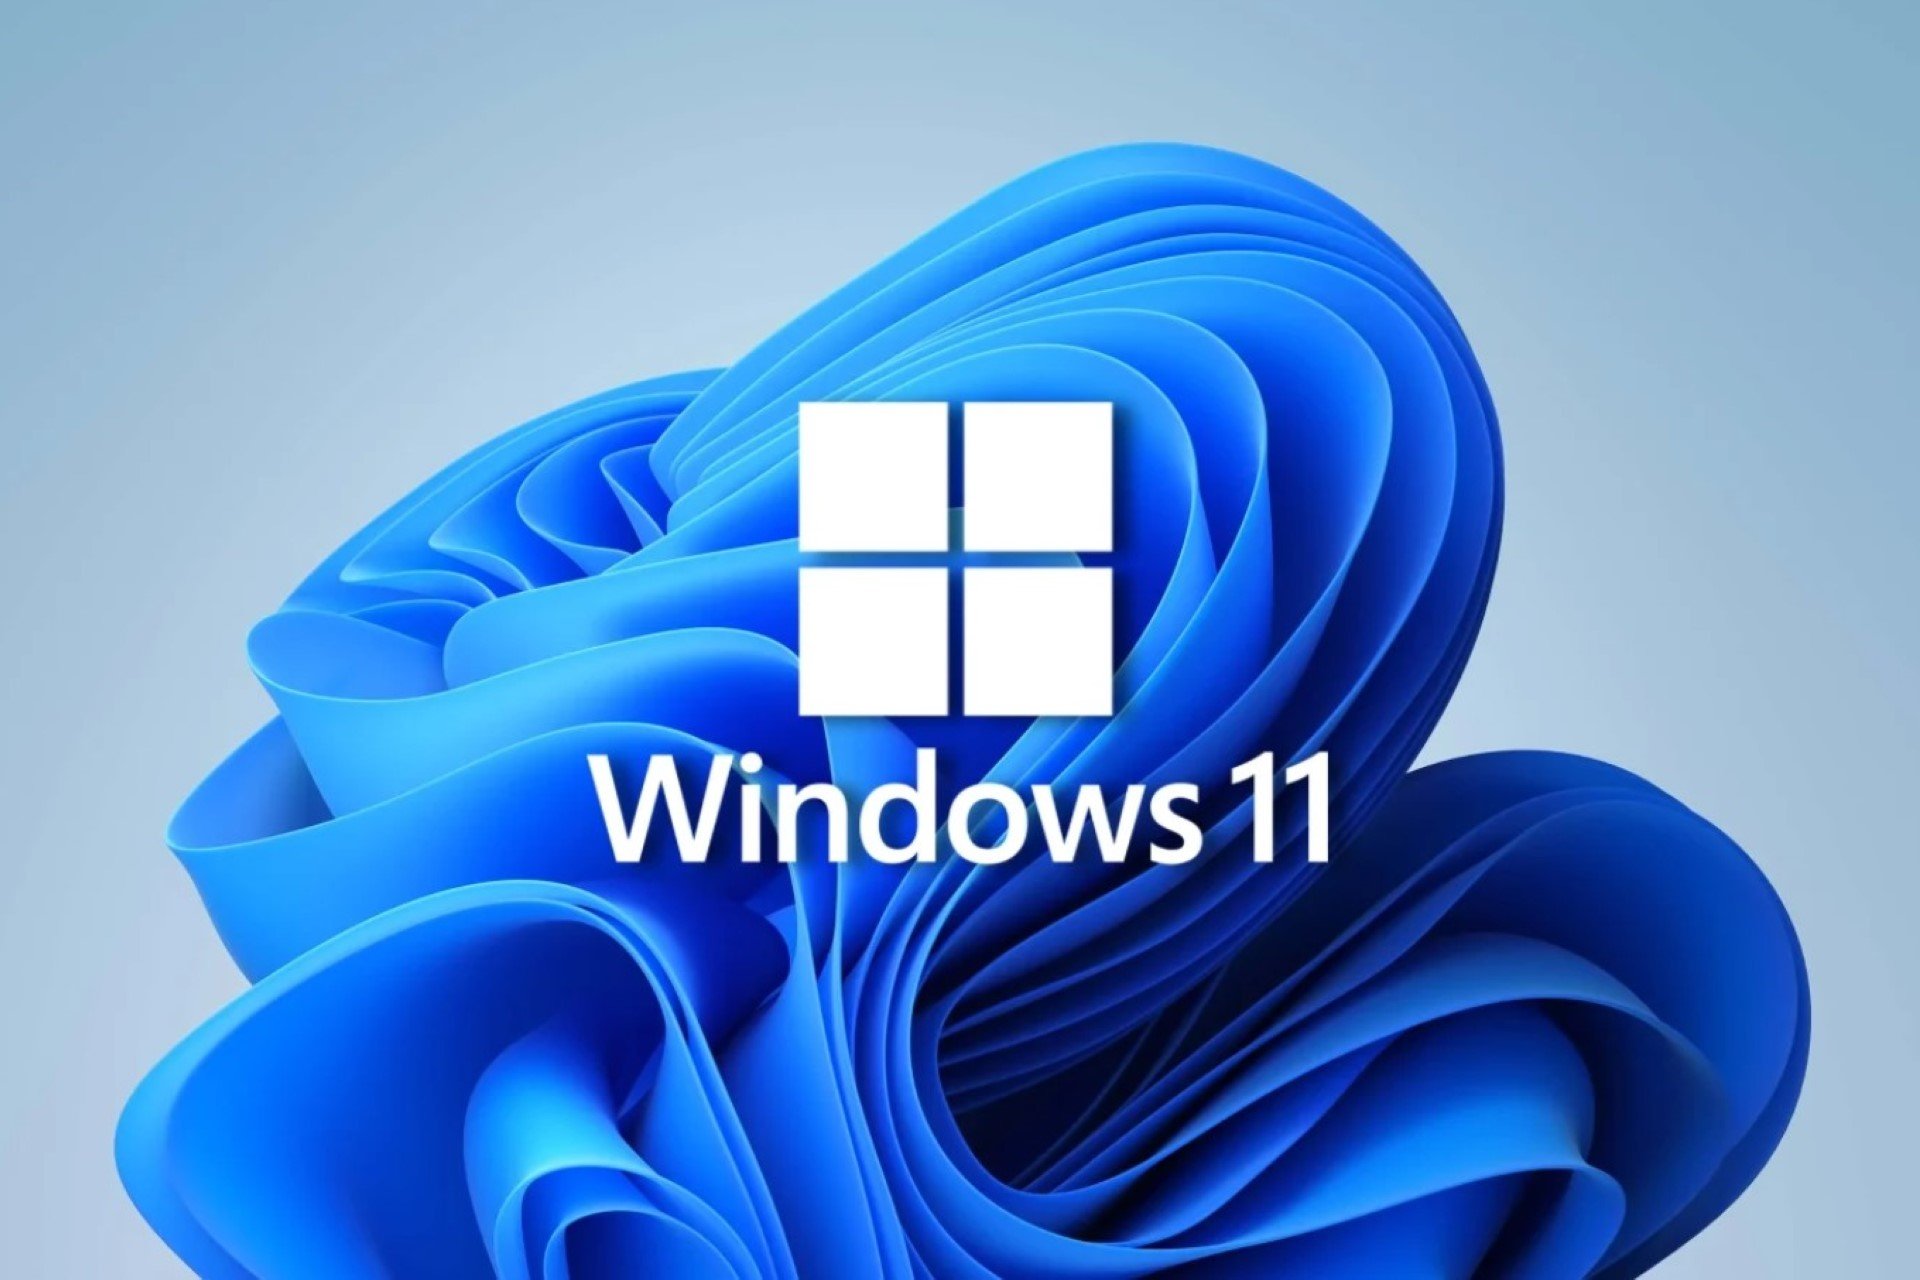 Microsoft resolves Wi-Fi issues caused by Windows 11 update